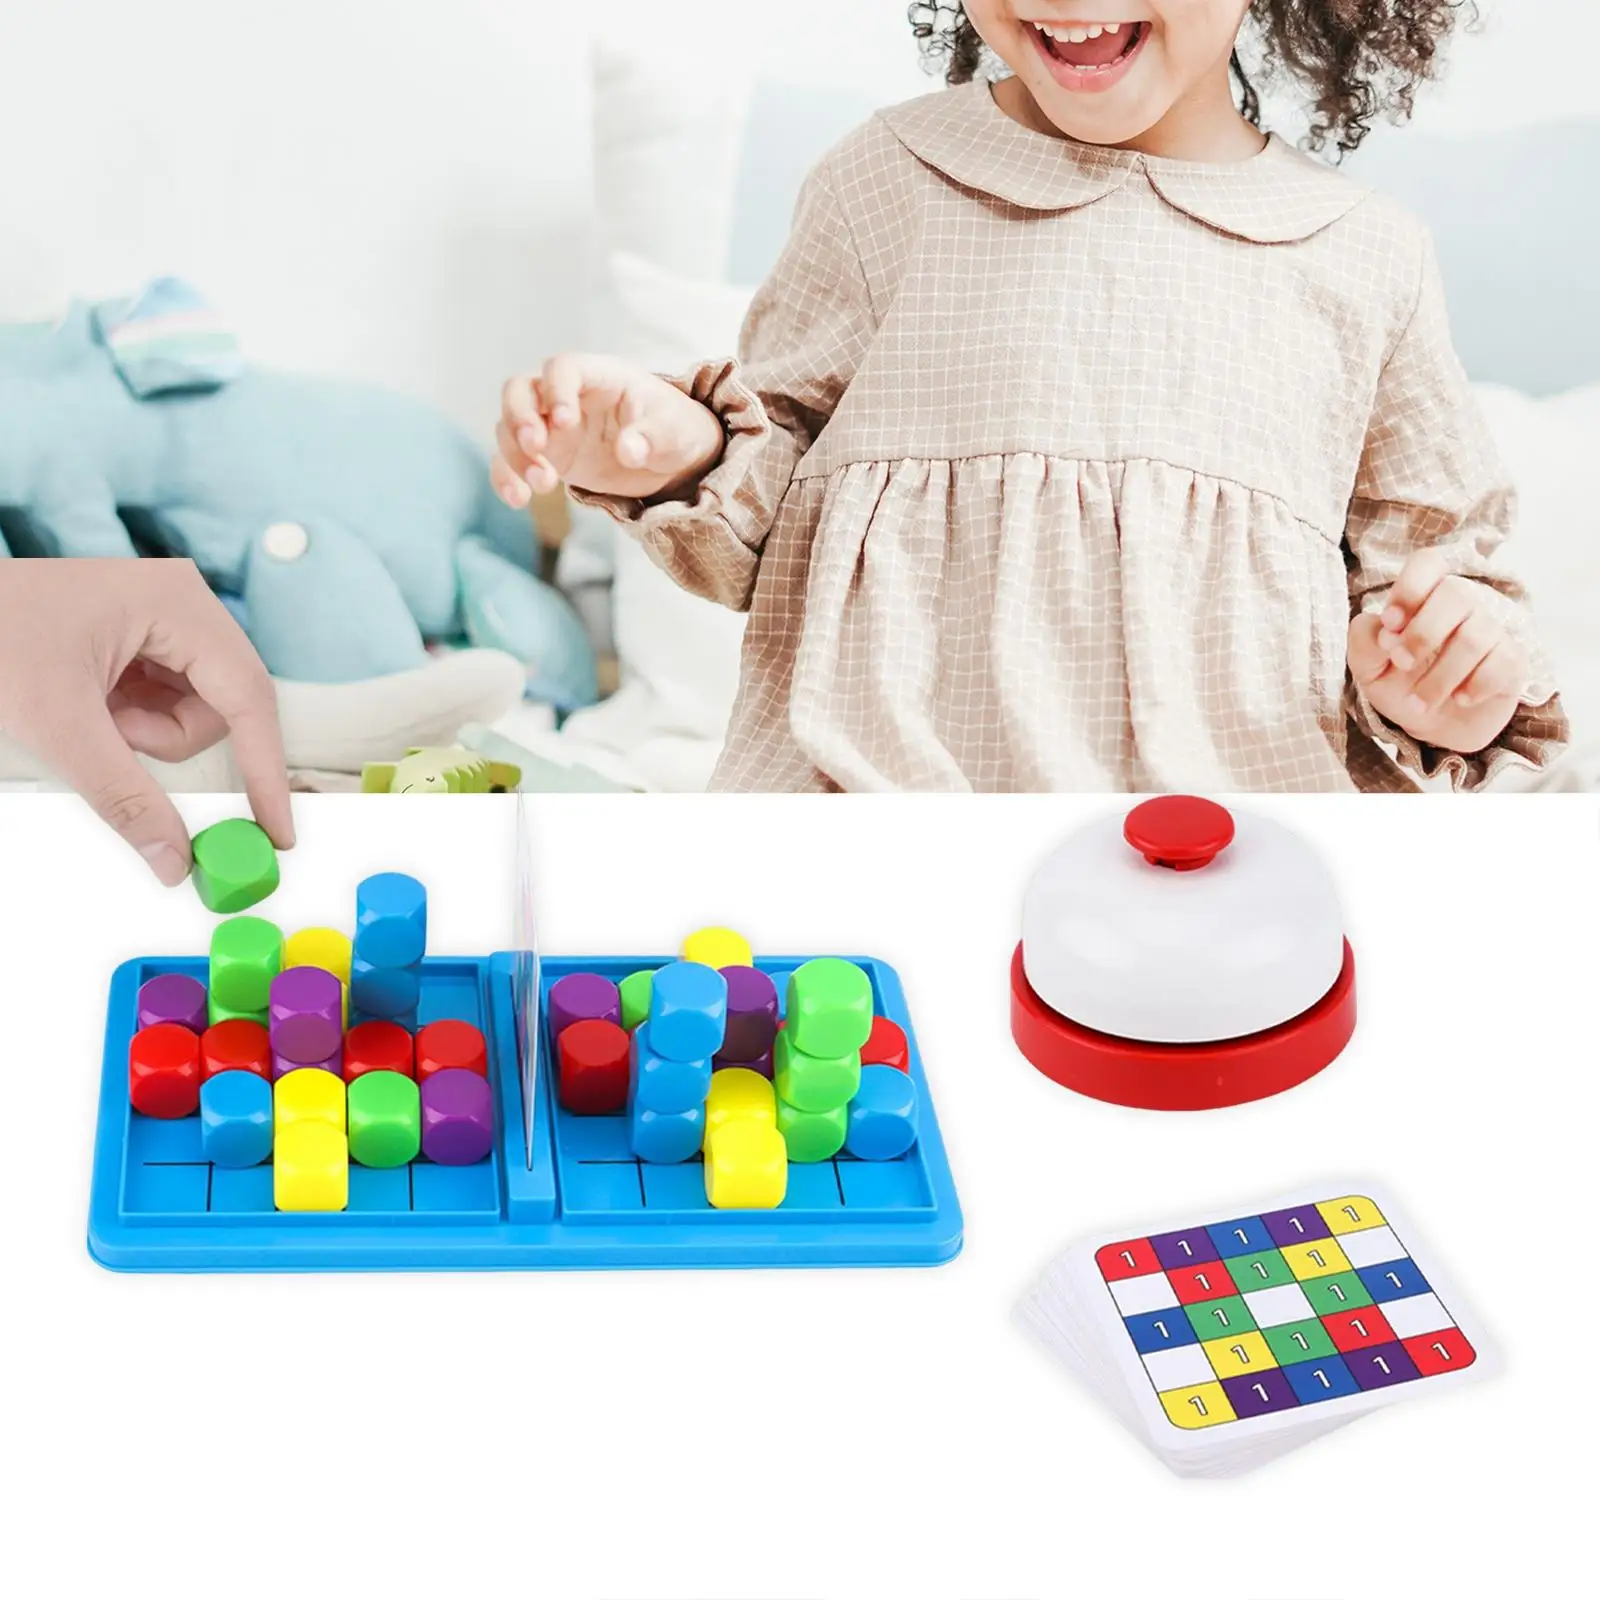 Block Game Fast Raced Educational with BLOCKERS Flexible Matching Race Board Games game for Activity Outdoors Travel Home